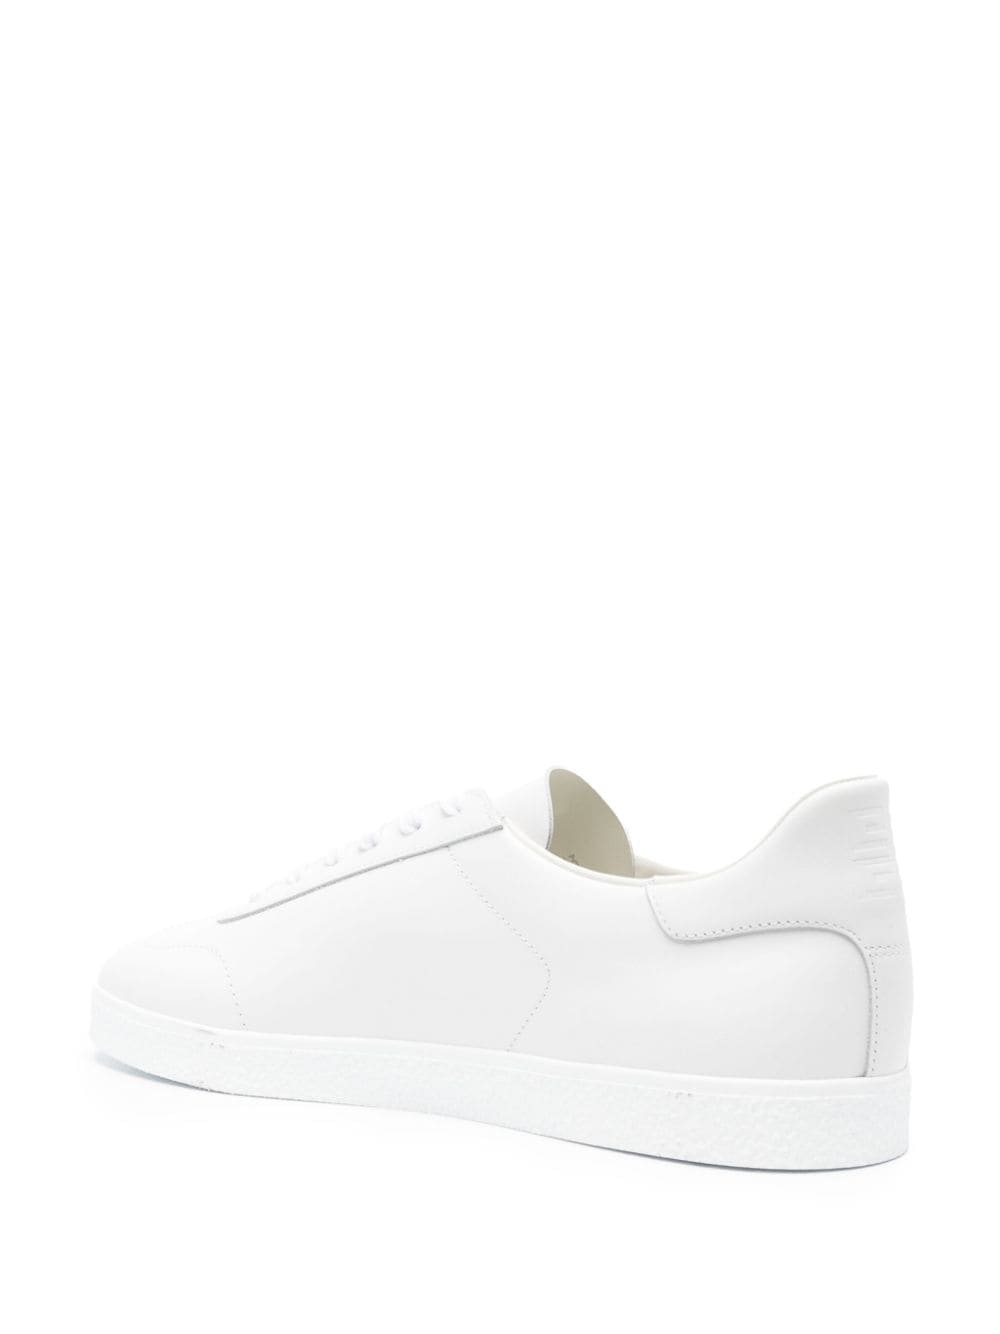 Town leather sneakers<BR/><BR/><BR/>